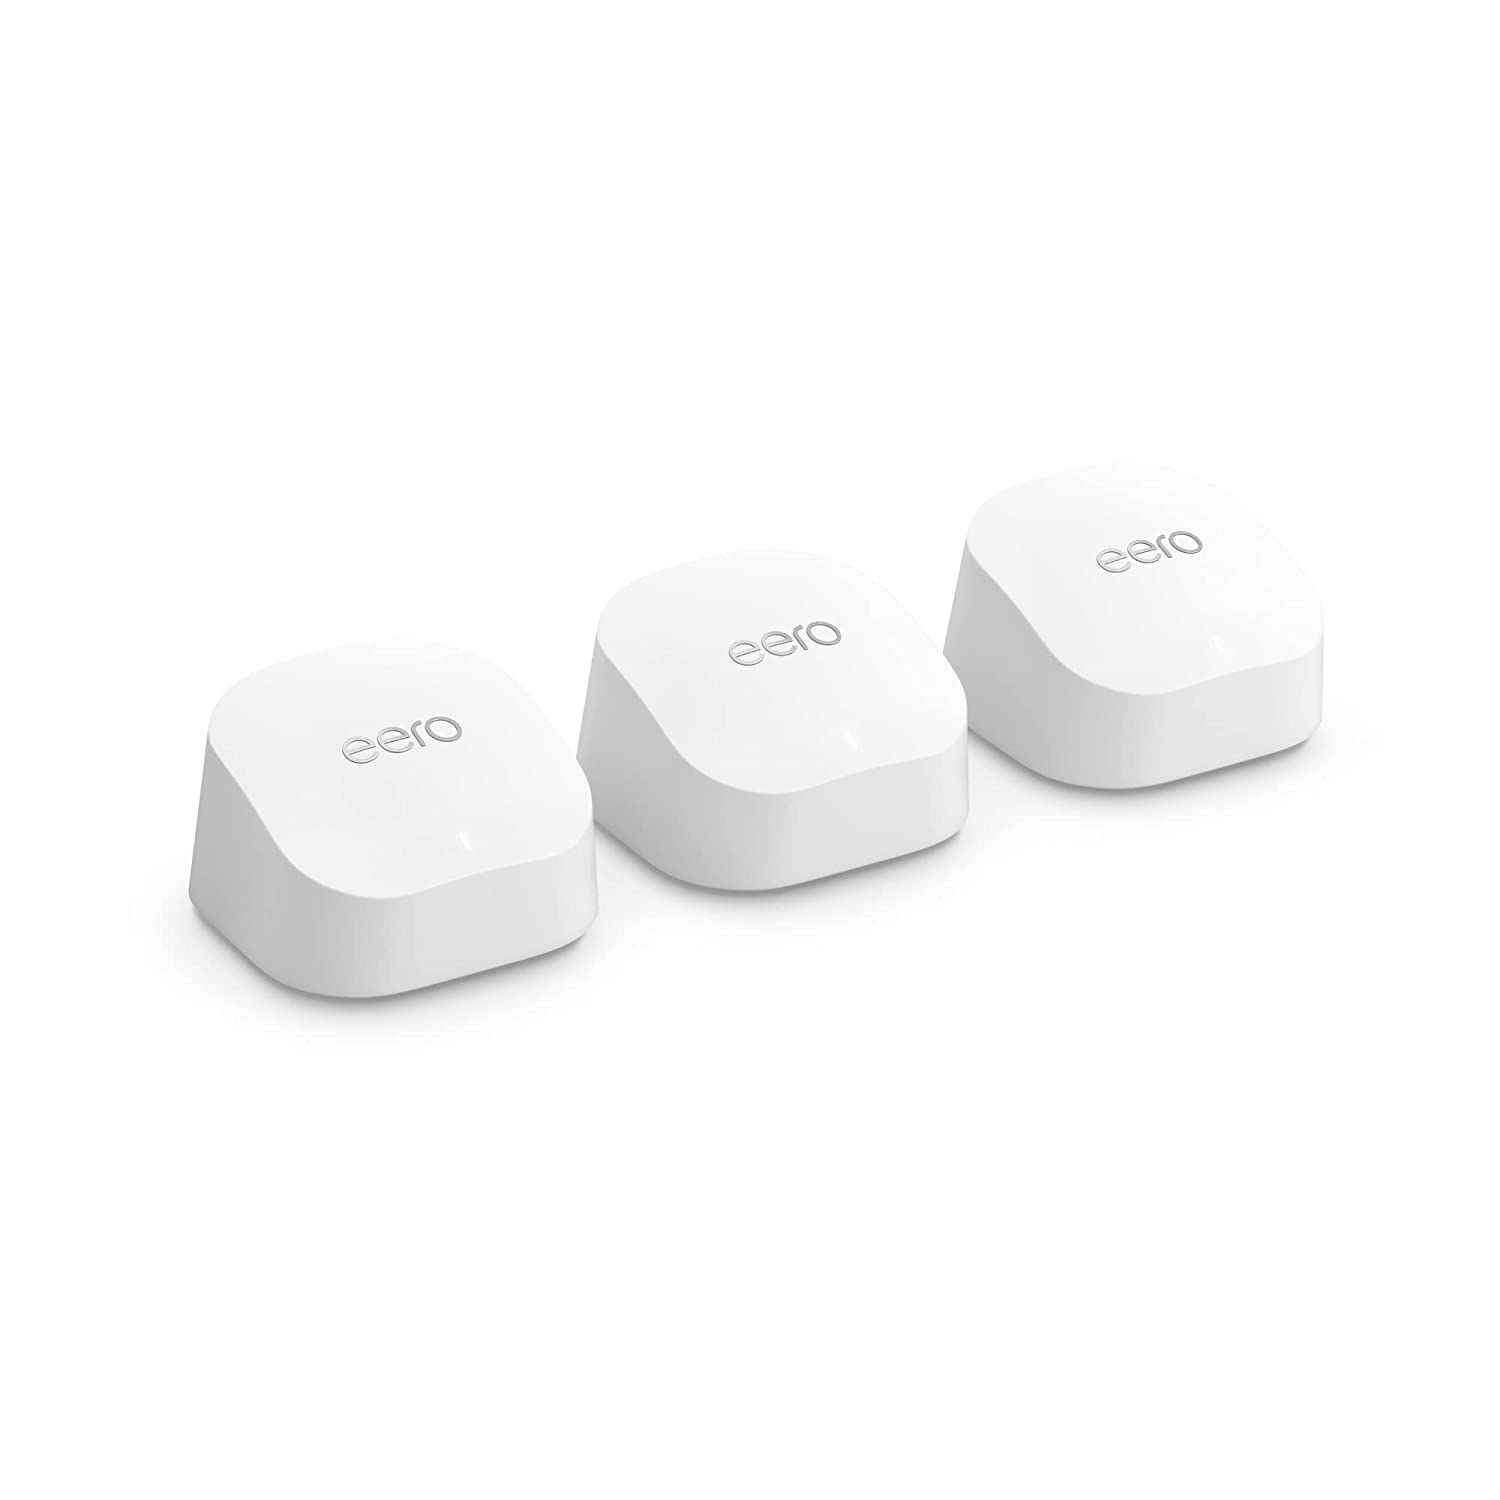 Introducing Amazon eero 6+ dual-band mesh Wi-Fi 6 router, with built-in Zigbee smart home hub and 160MHz client device support (2022 release)